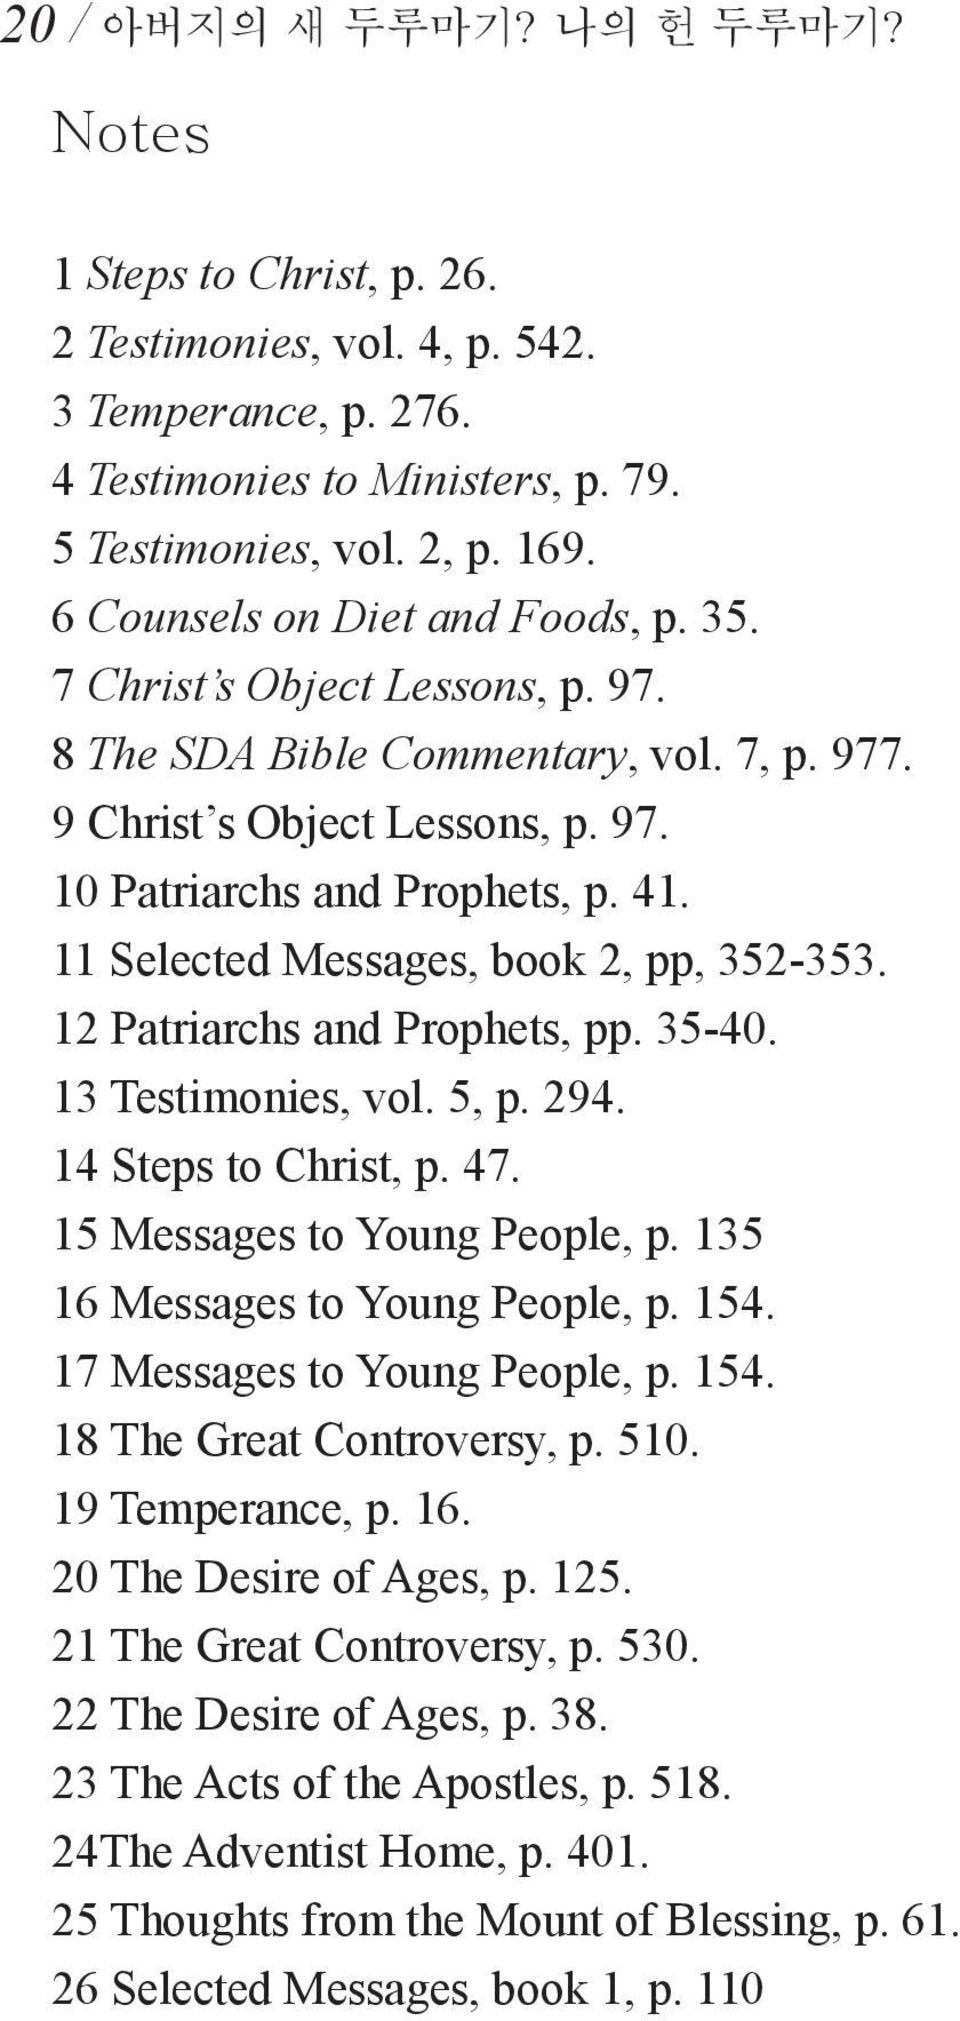 11 Selected Messages, book 2, pp, 352-353. 12 Patriarchs and Prophets, pp. 35-40. 13 Testimonies, vol. 5, p. 294. 14 Steps to Christ, p. 47. 15 Messages to Young People, p.